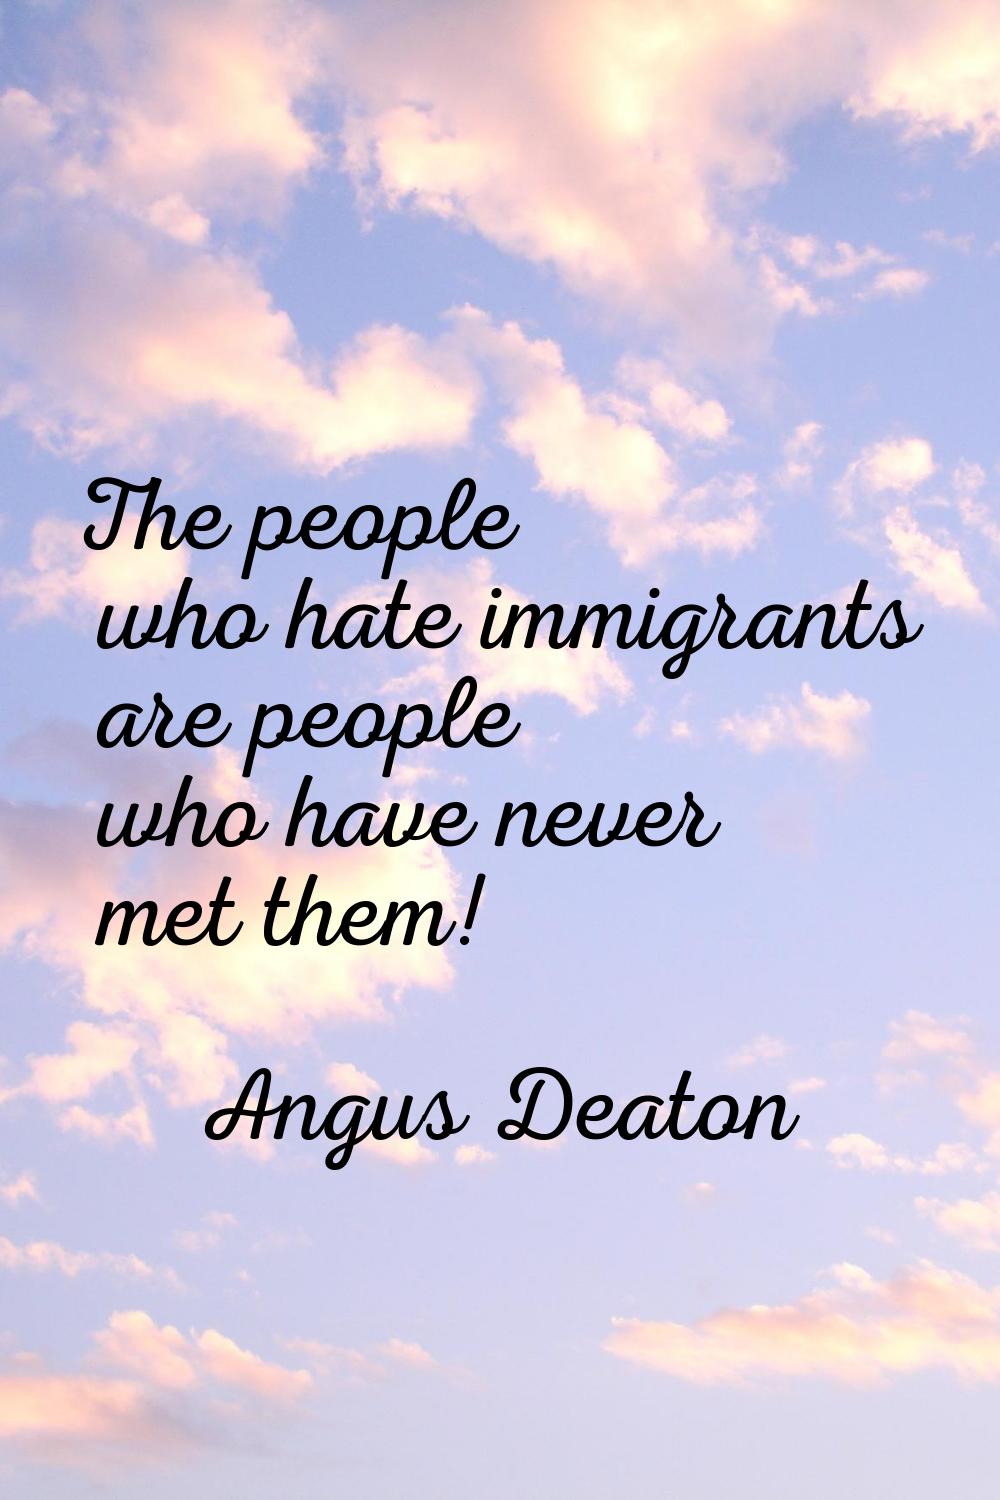 The people who hate immigrants are people who have never met them!